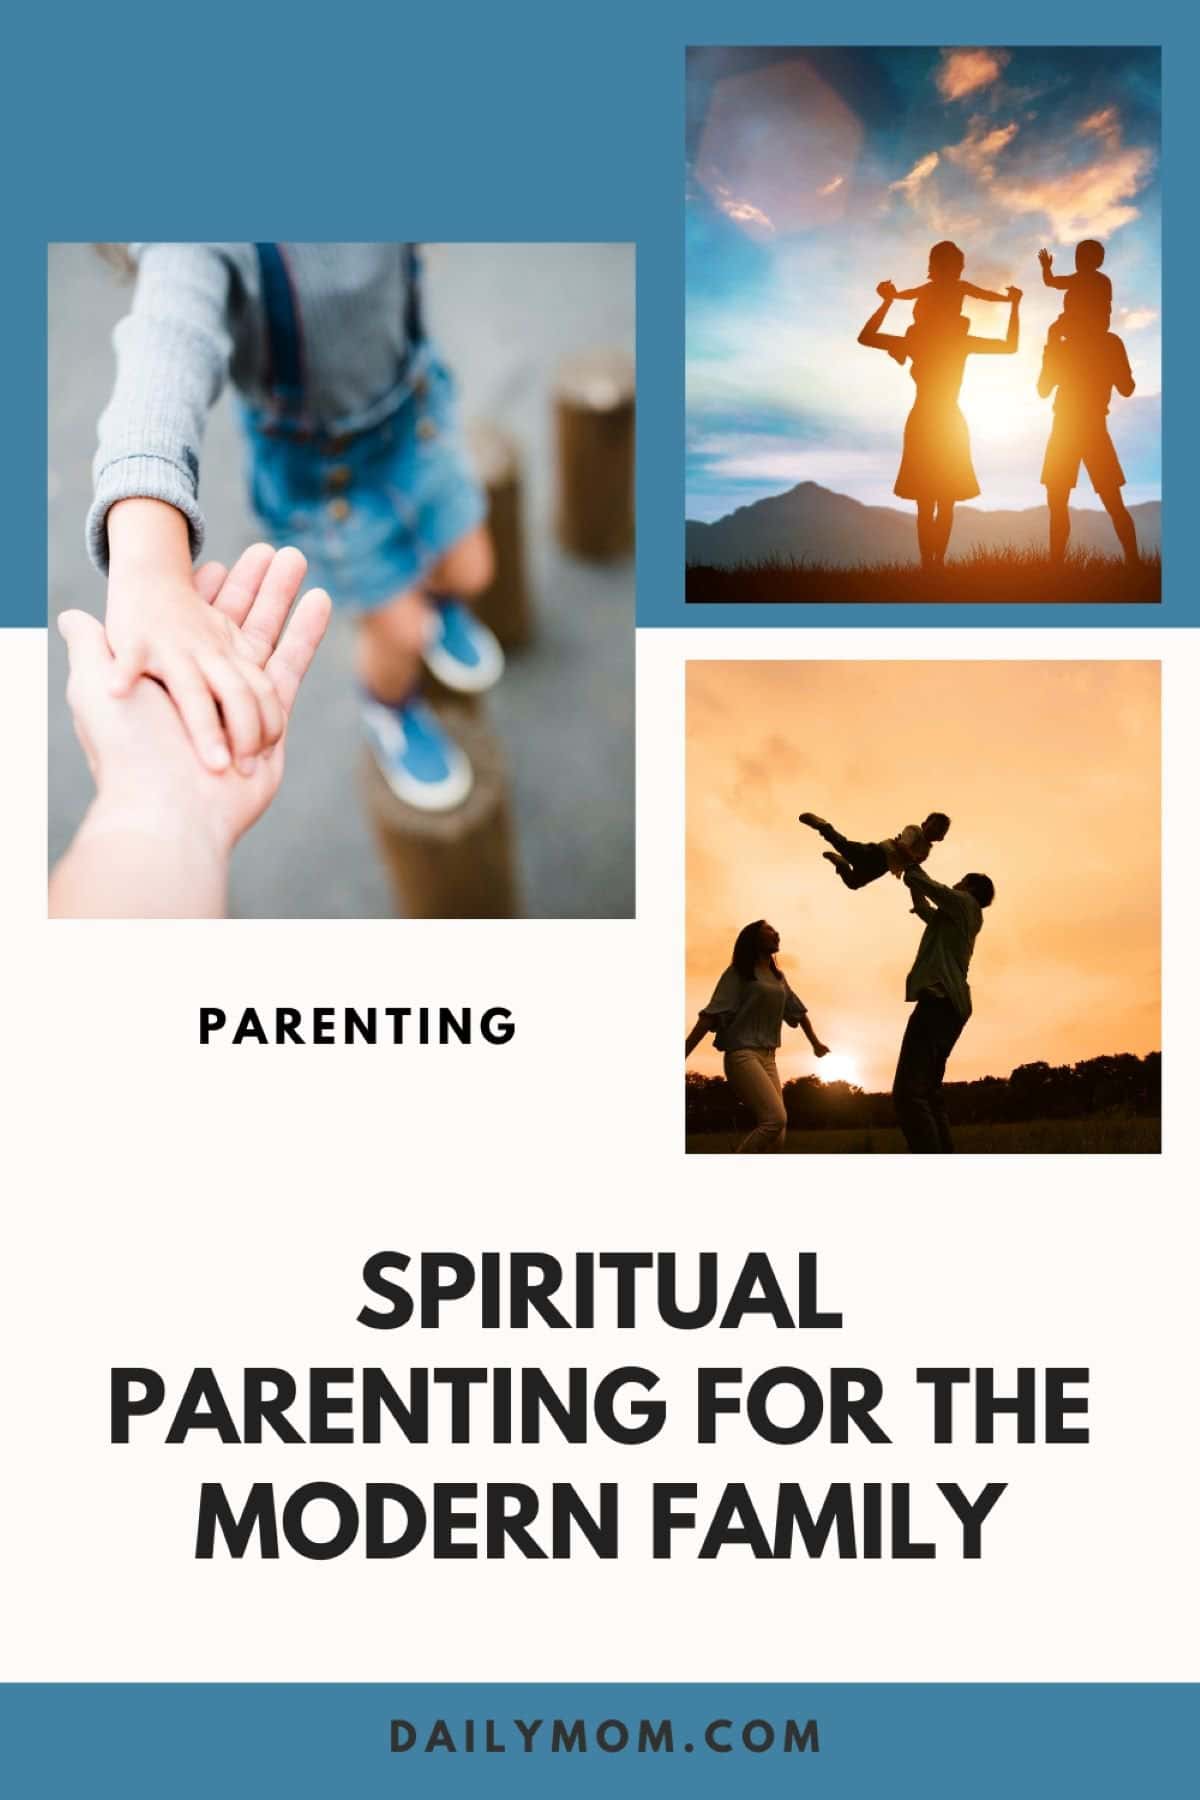 Parenting By Design: Using Human Design Parenting Types, Spiritual Practices, And Conscious Parenting To Be The Best Parent 5 Daily Mom, Magazine For Families